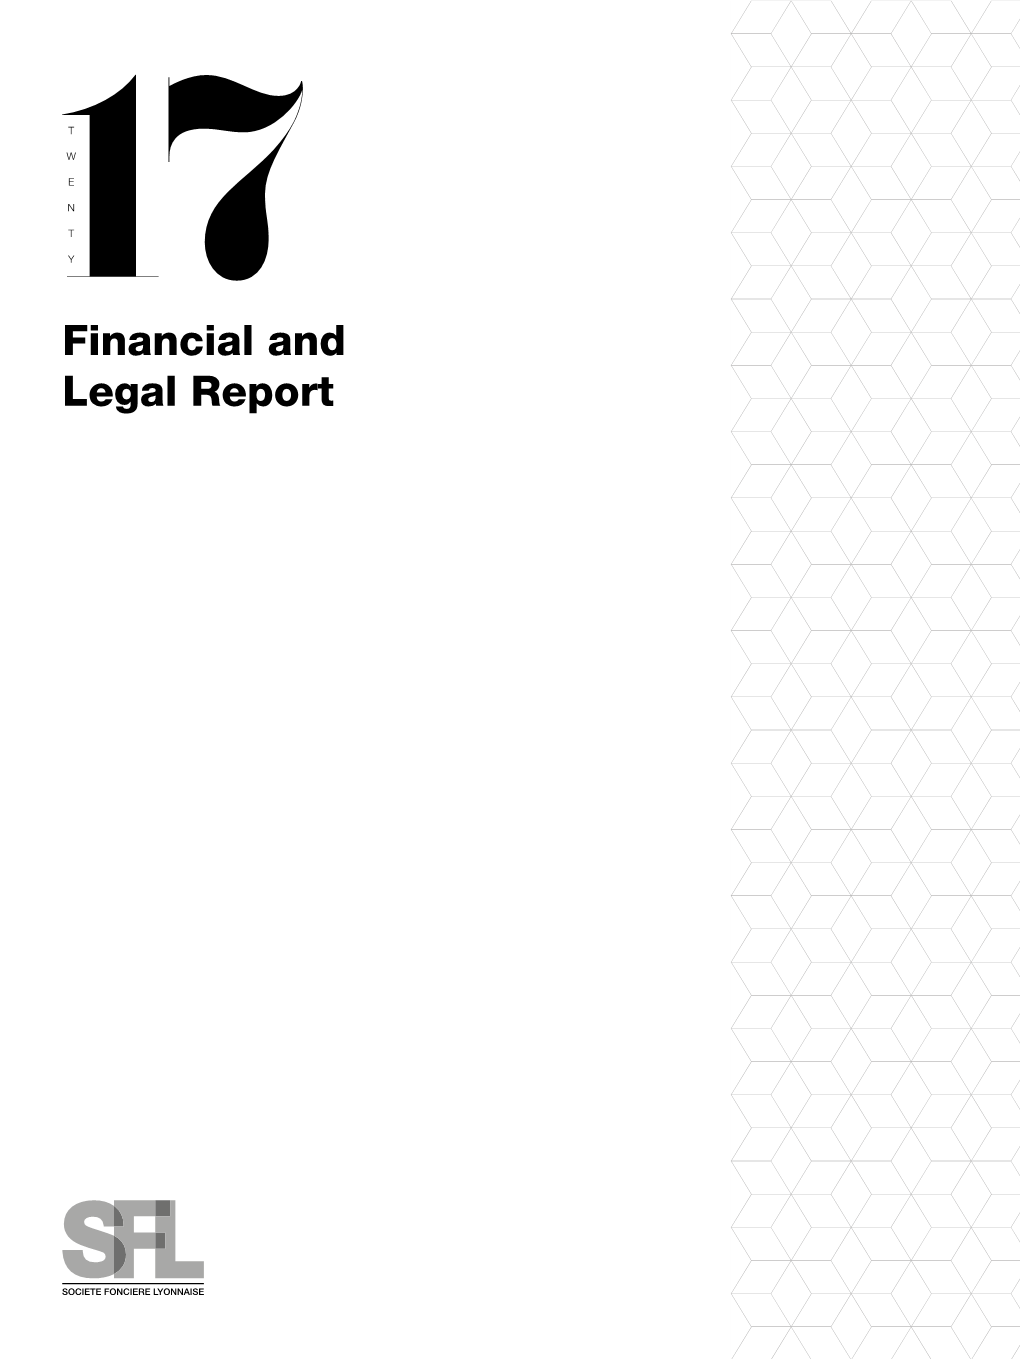 Financial and Legal Report